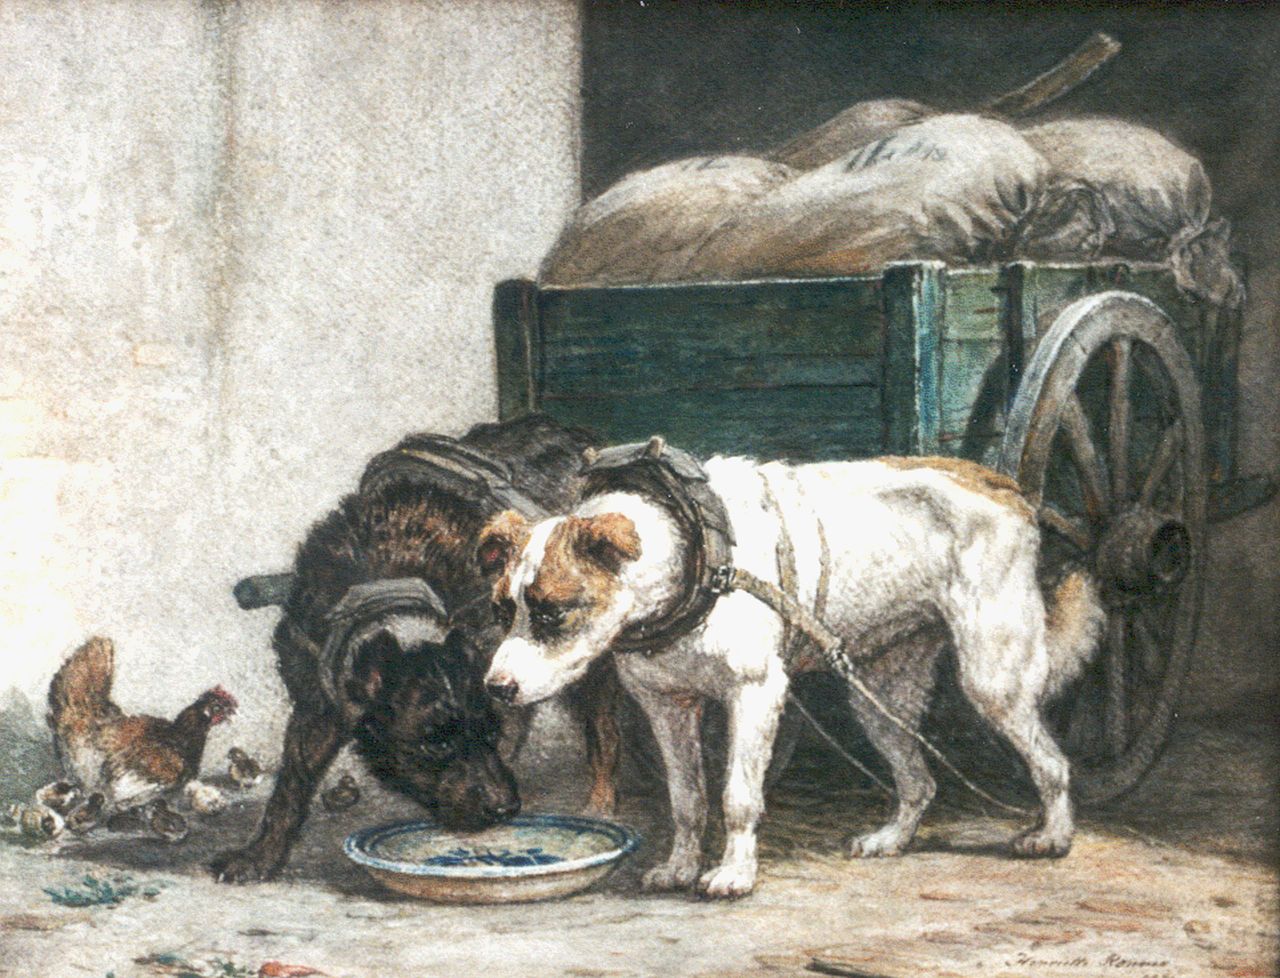 Ronner-Knip H.  | Henriette Ronner-Knip, Draft dogs eating, Aquarell auf Papier 35,0 x 44,5 cm, signed l.r. und dated 1871